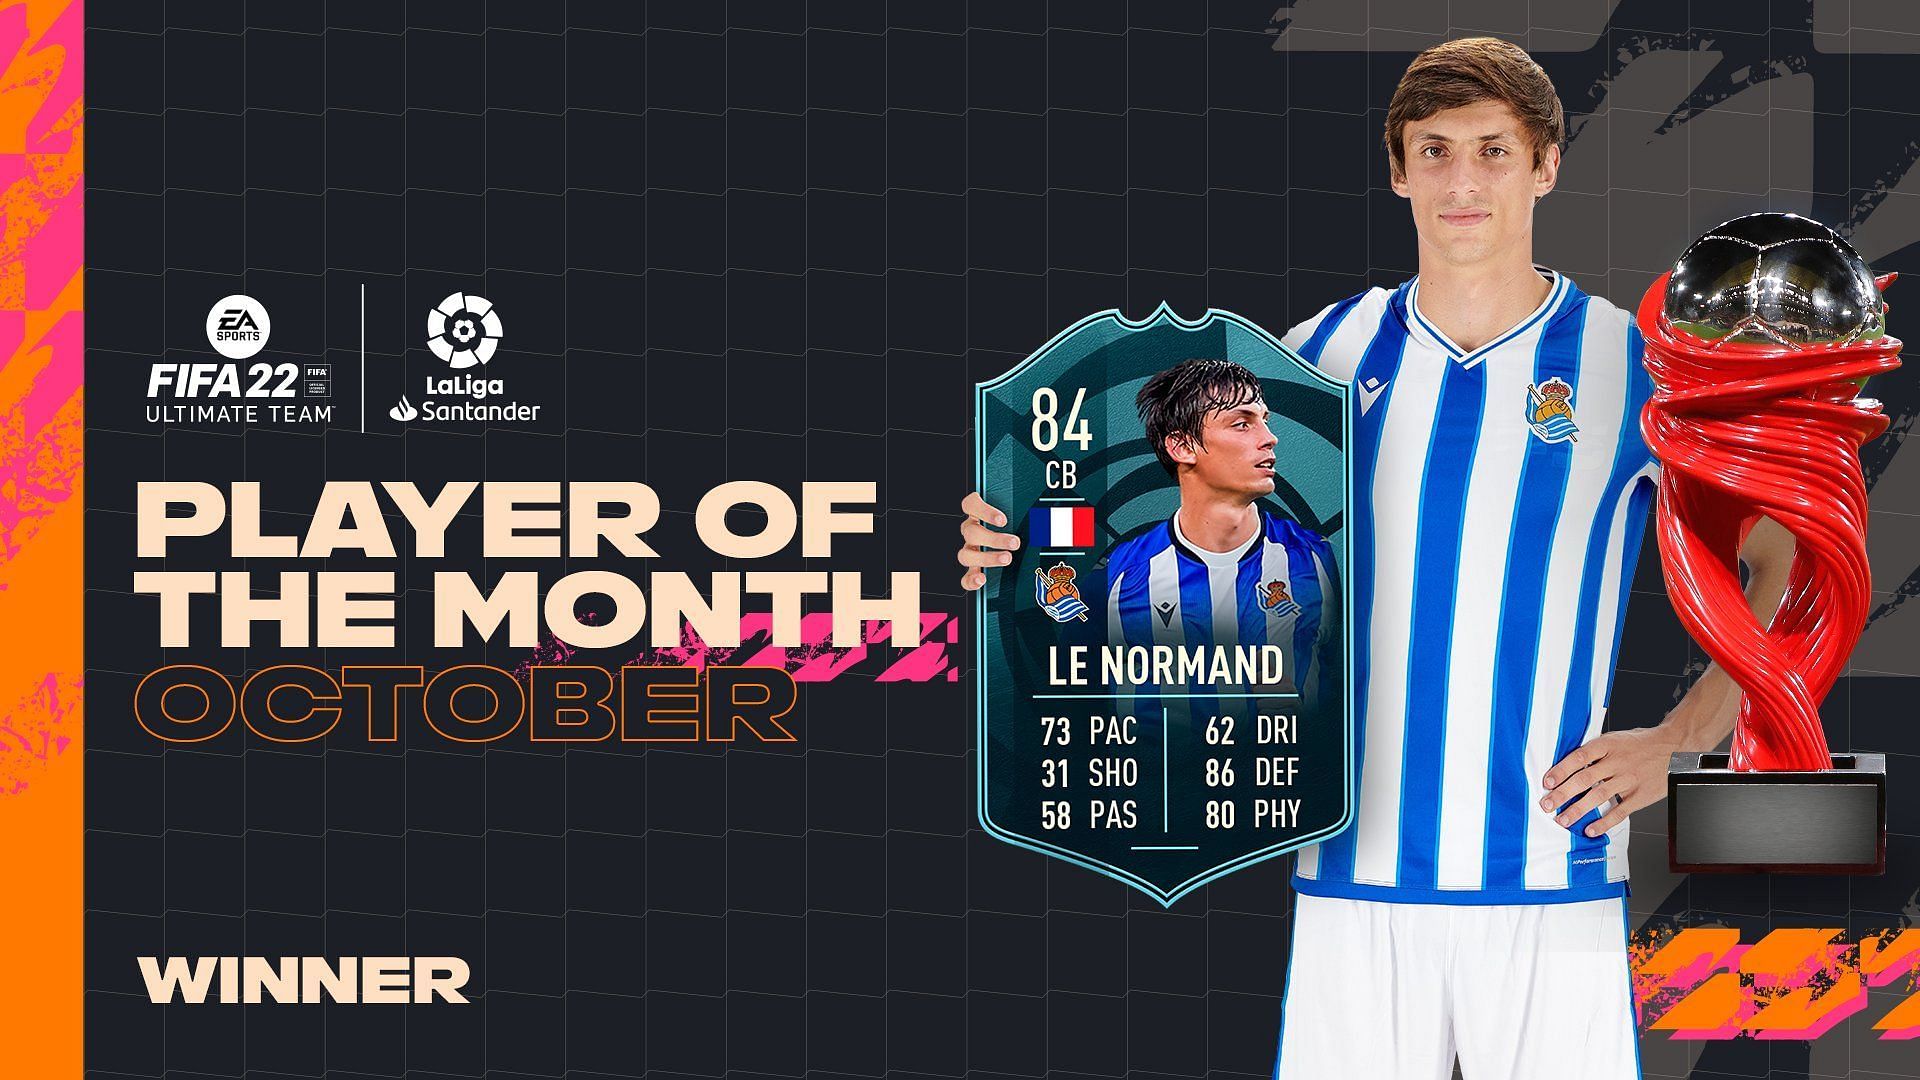 Robin Le Normand is the La Liga Player of the Month for October (Image via EA Sports)